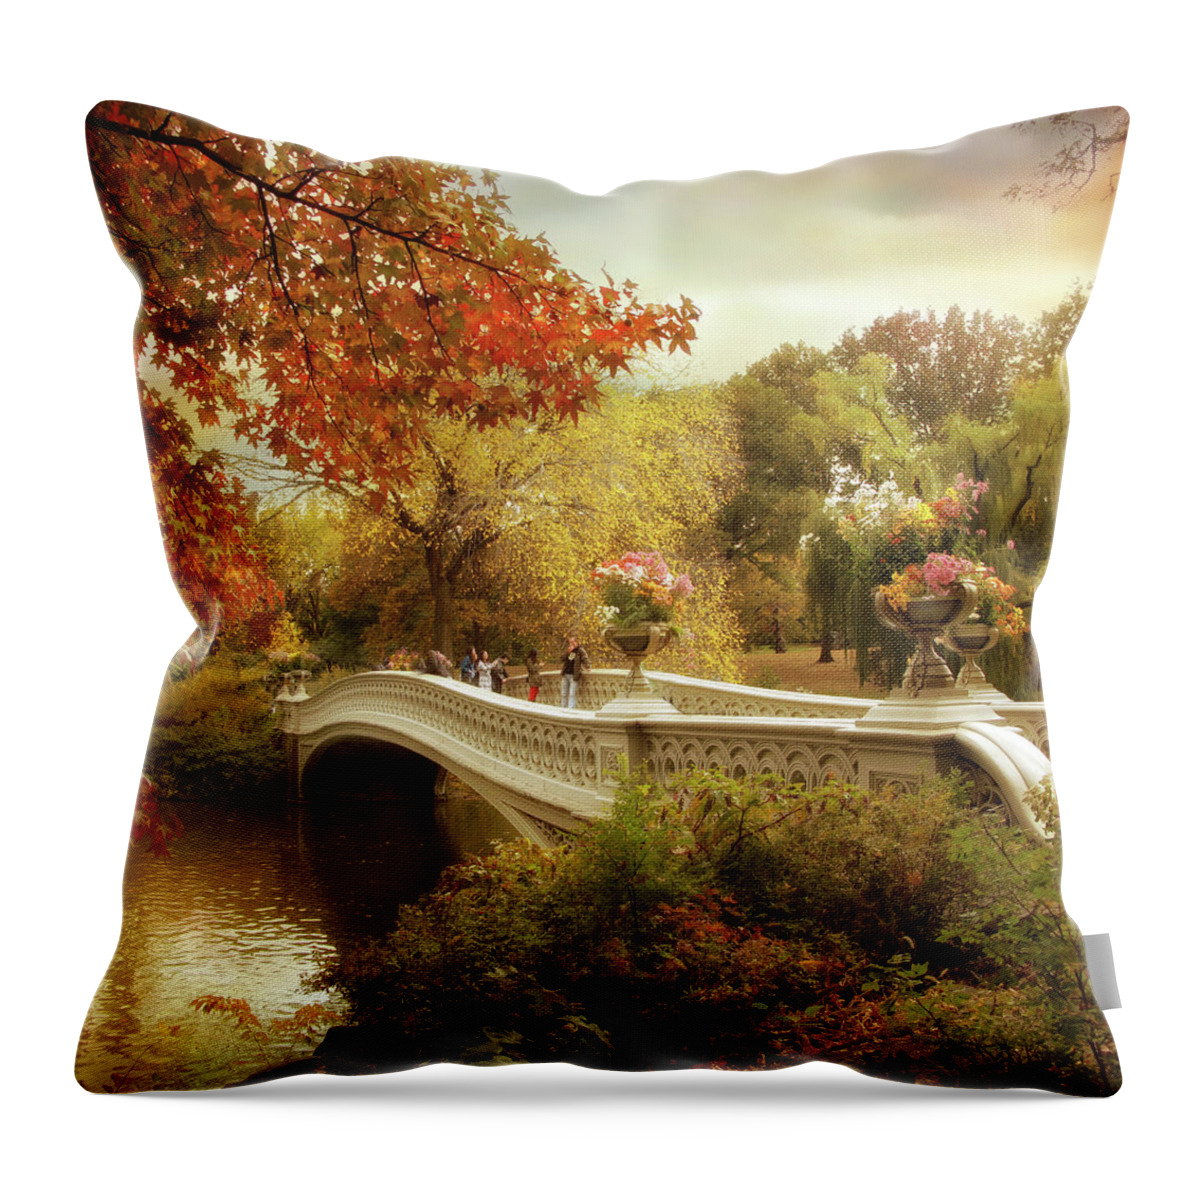 Bow Bridge Throw Pillow featuring the photograph Autumn's Arrival at Bow Bridge by Jessica Jenney